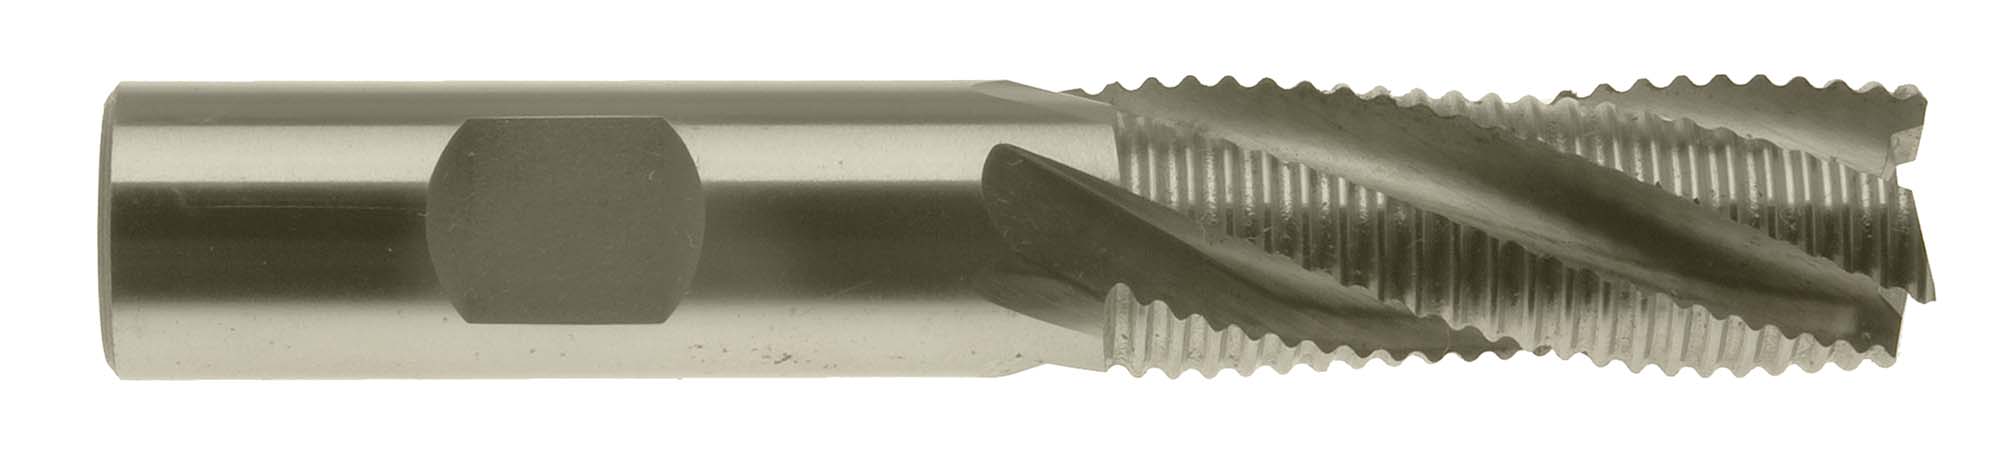 EM-CR367 - 1-3/4" Coarse Tooth M42 Cobalt Roughing End Mill- 3/4" Shank